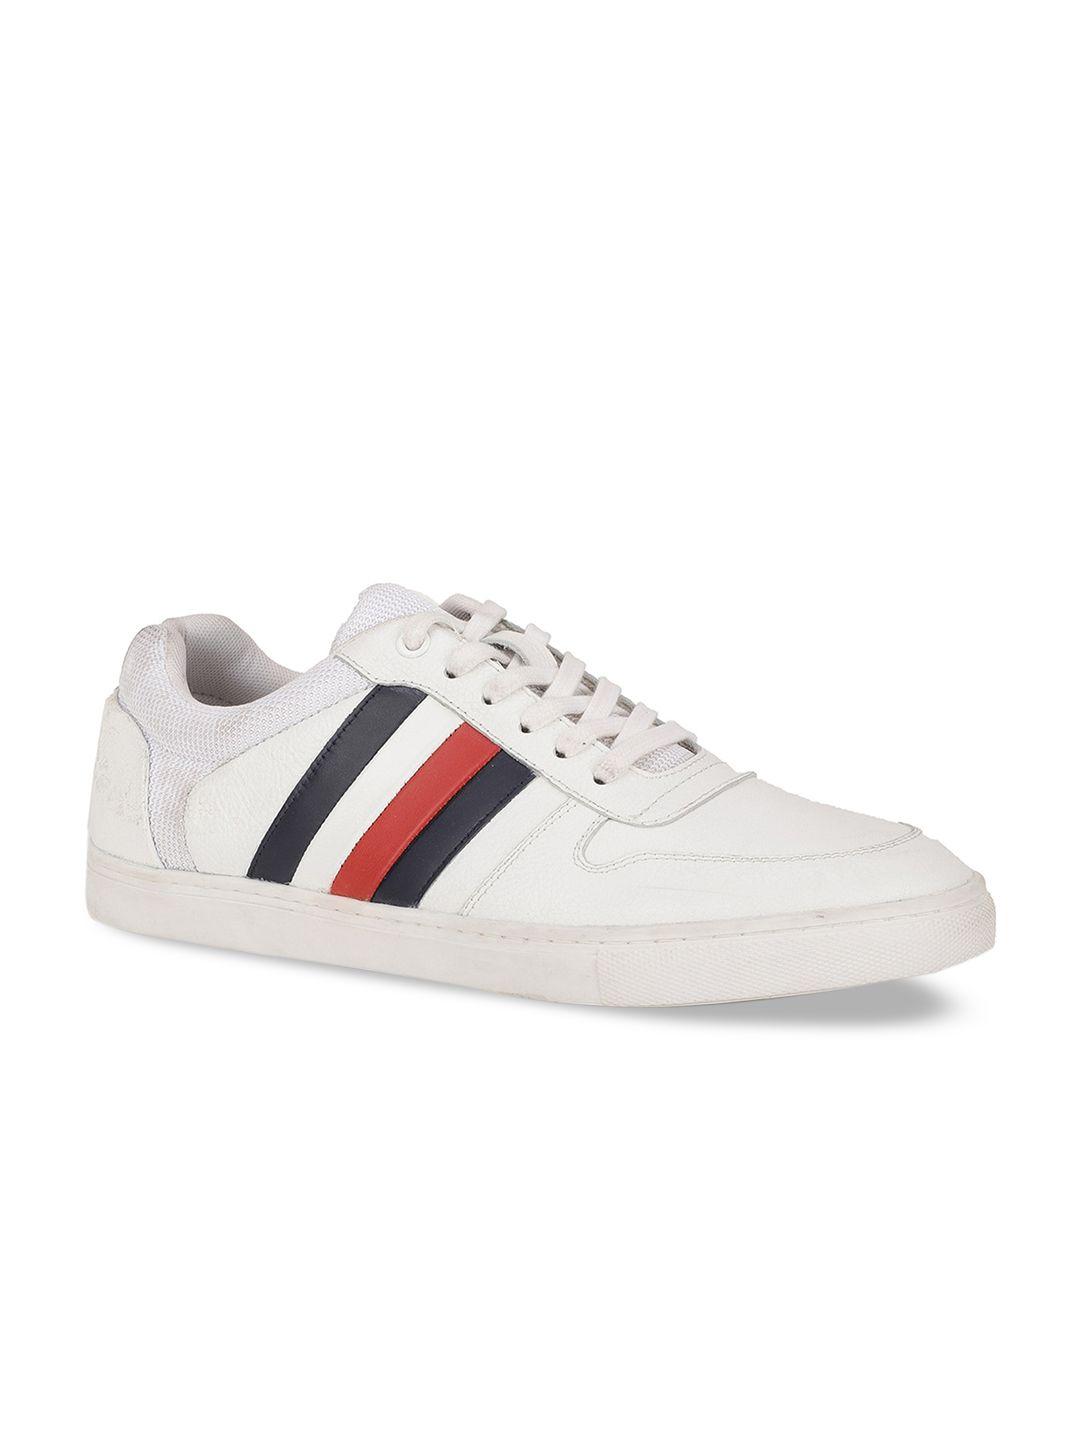 hush puppies men white striped leather sneakers